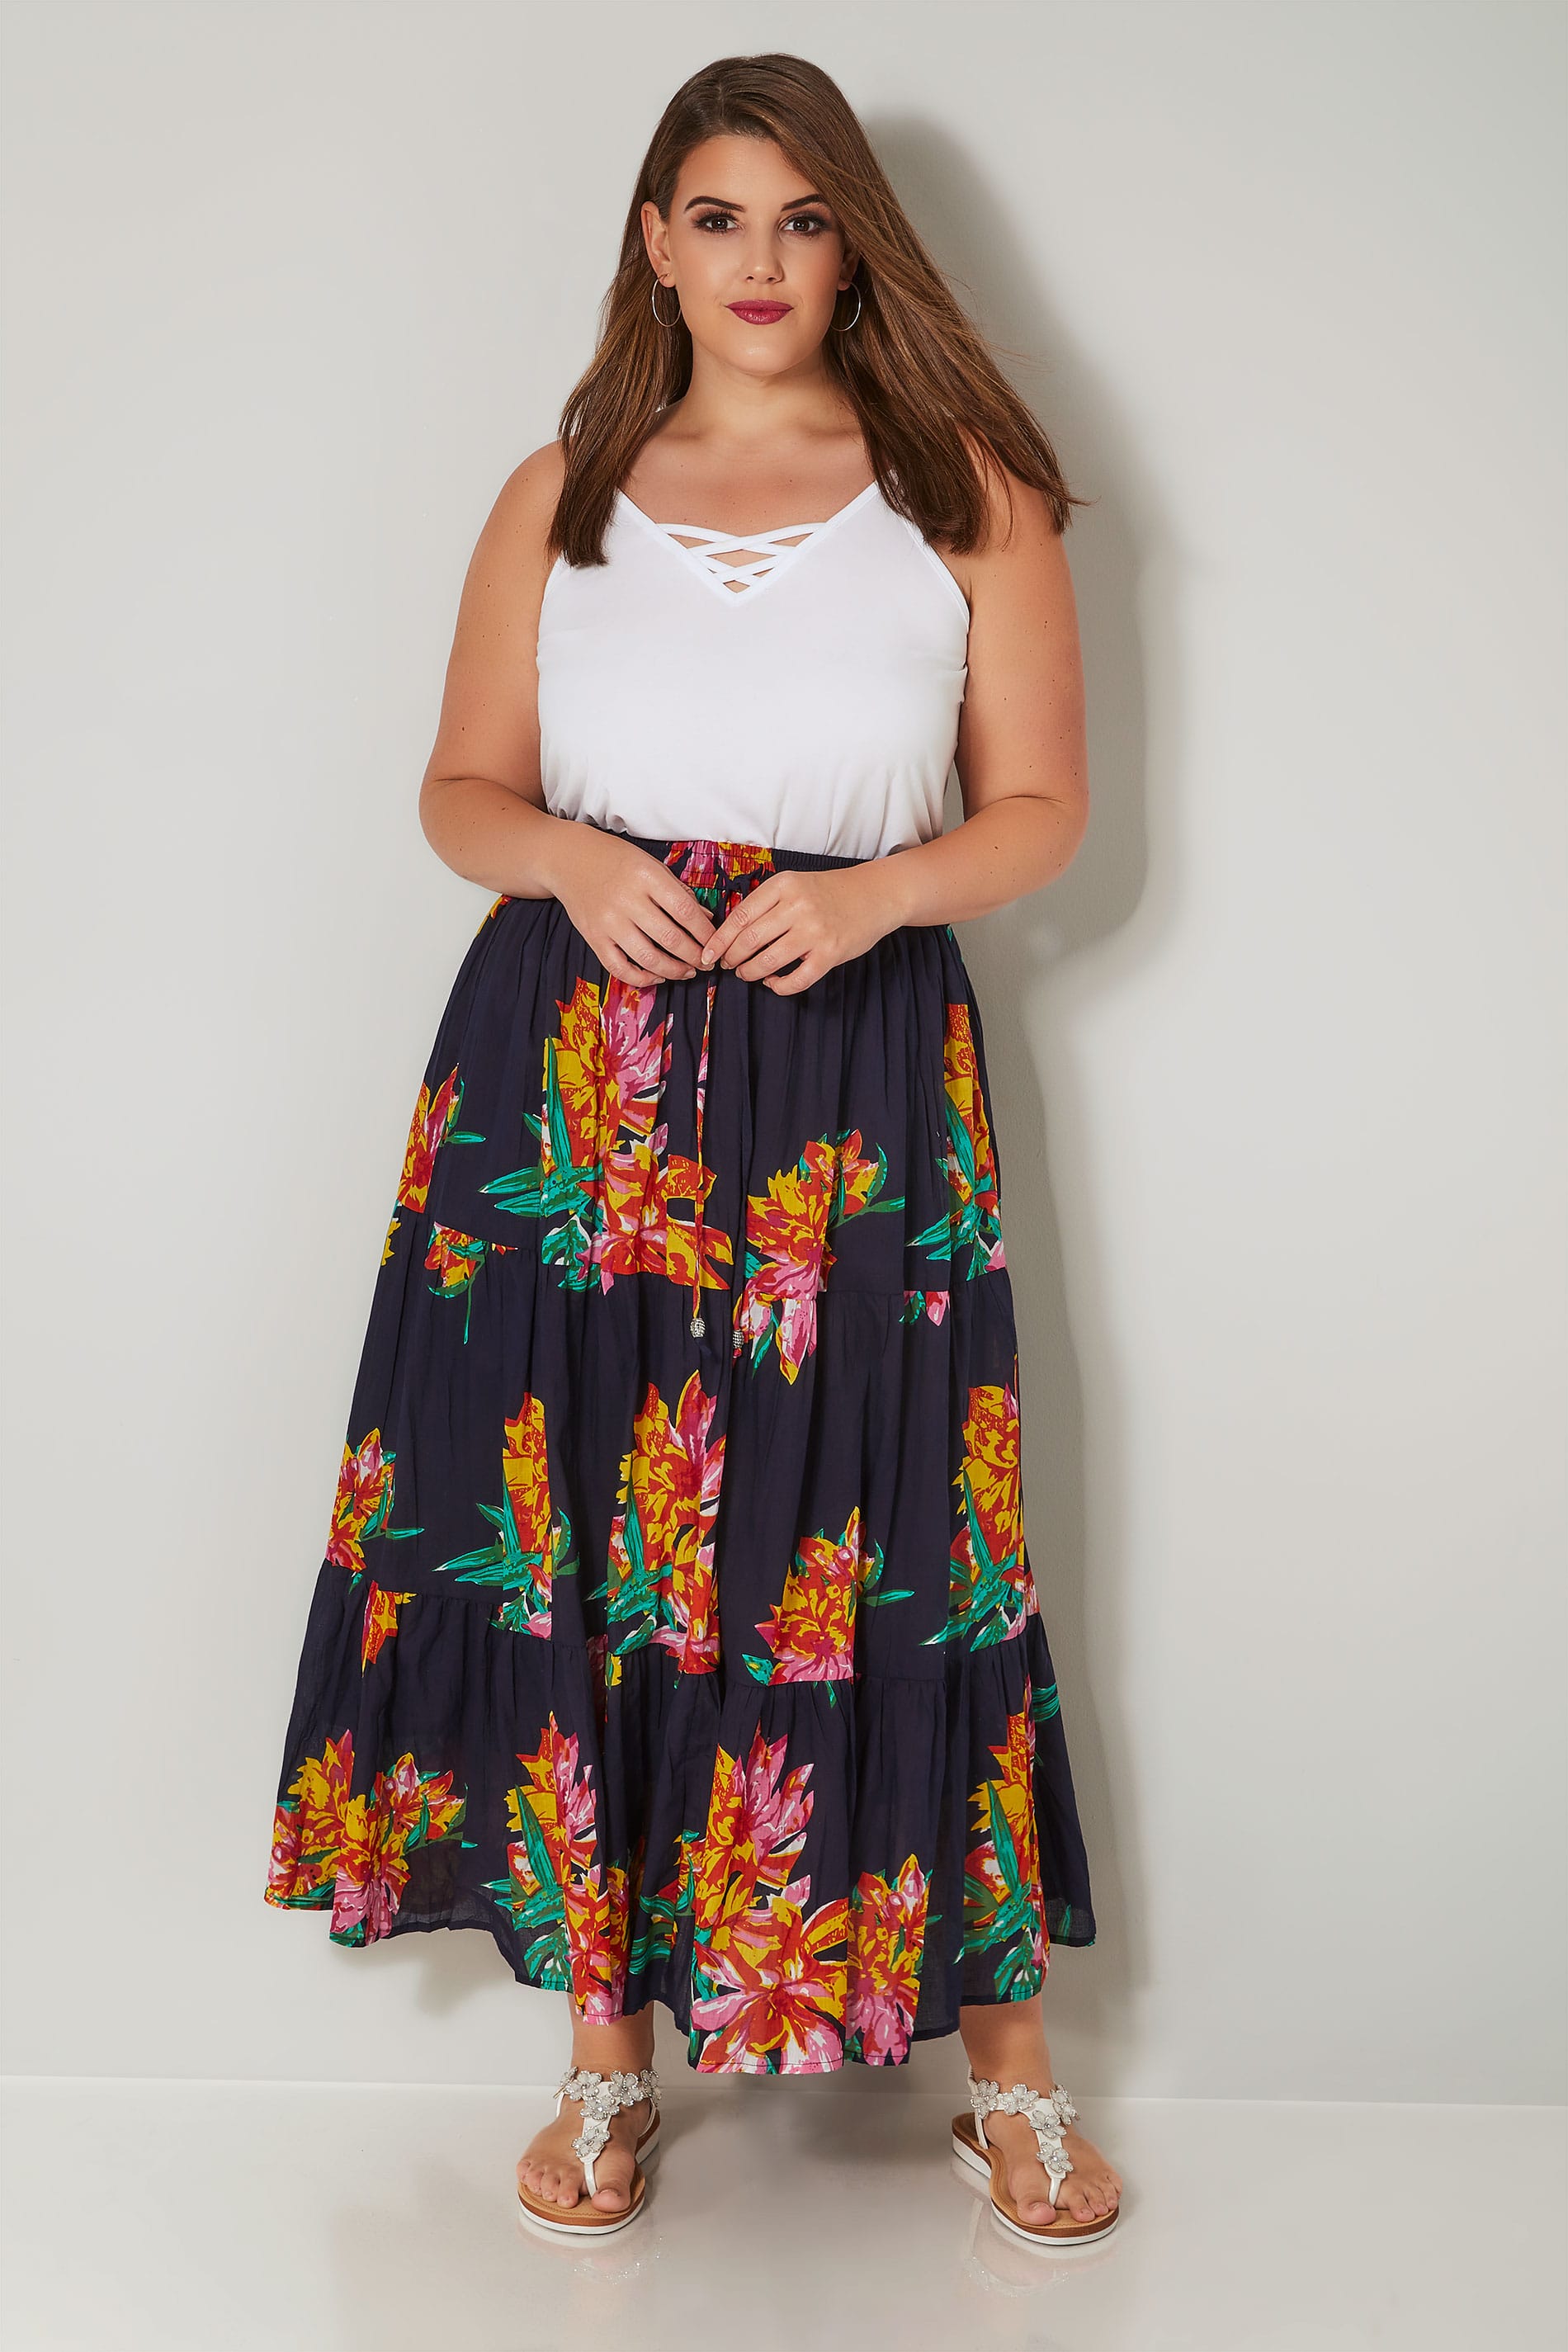 Navy & Multi Floral Print Tiered Maxi Skirt, plus size 16 to 36